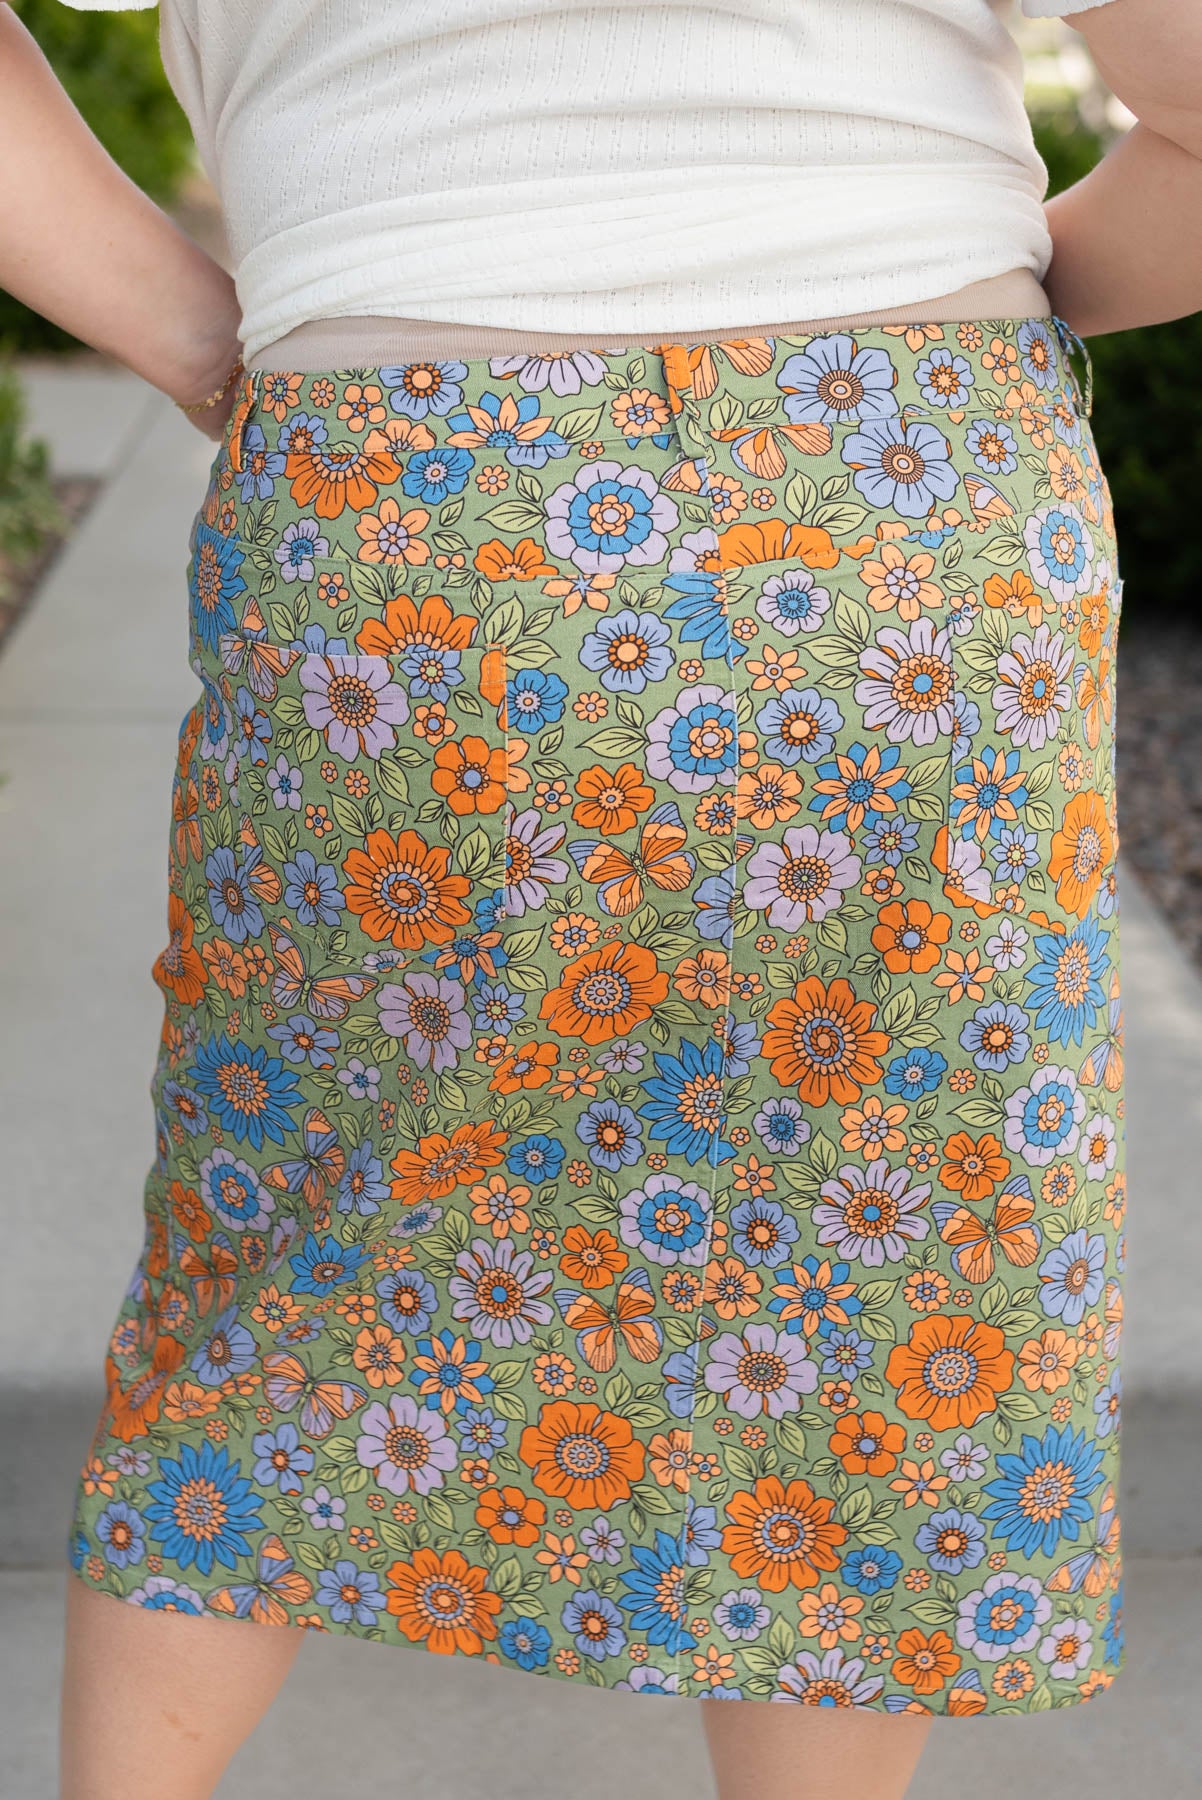 Back view of the plus size green multi floral jean skirt